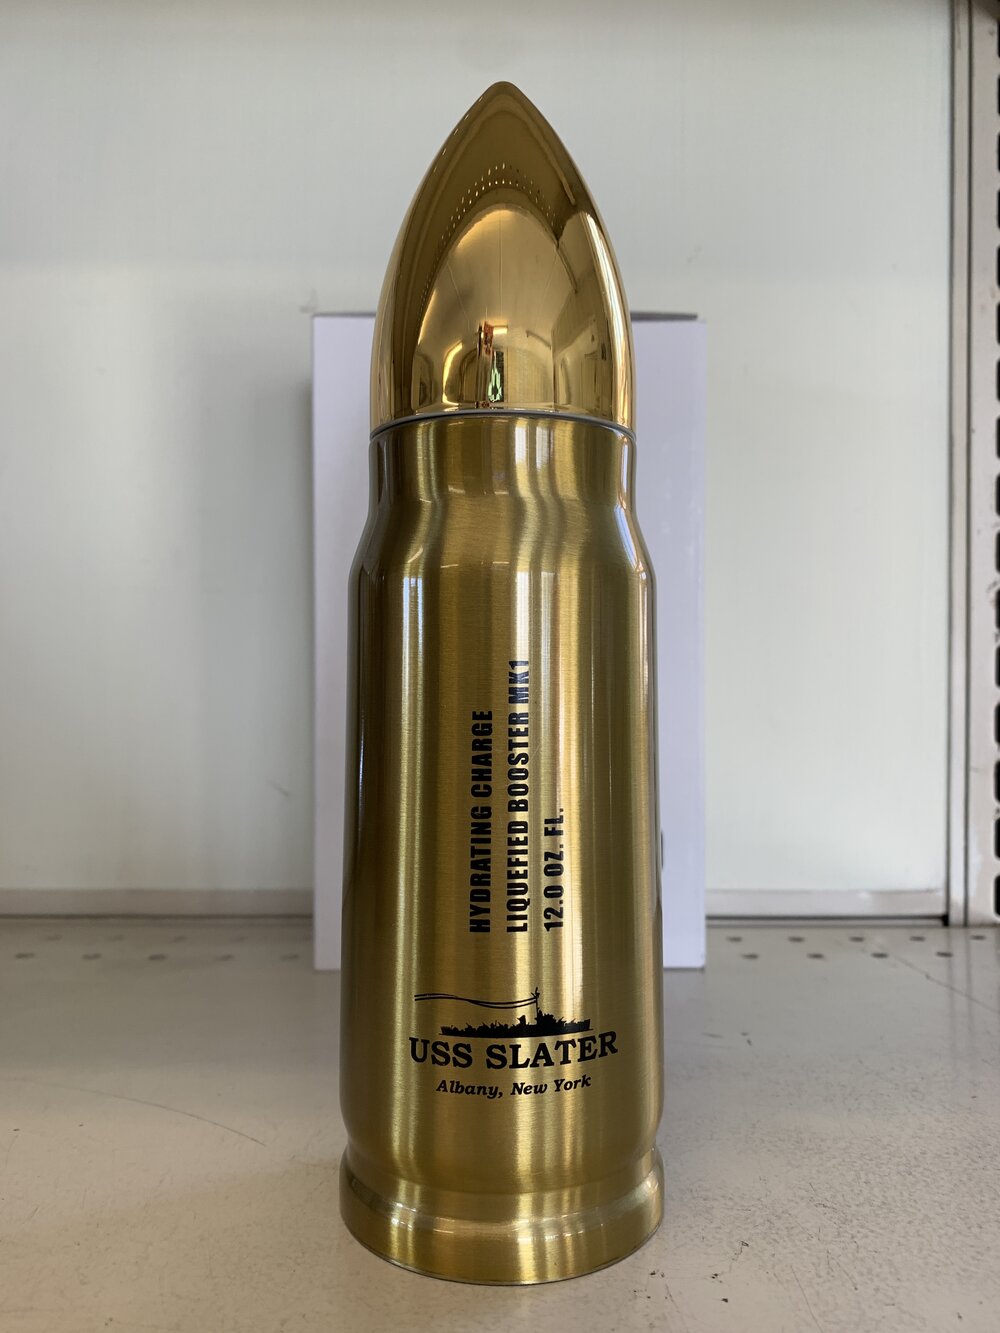 Bullet Thermos — USS SLATER